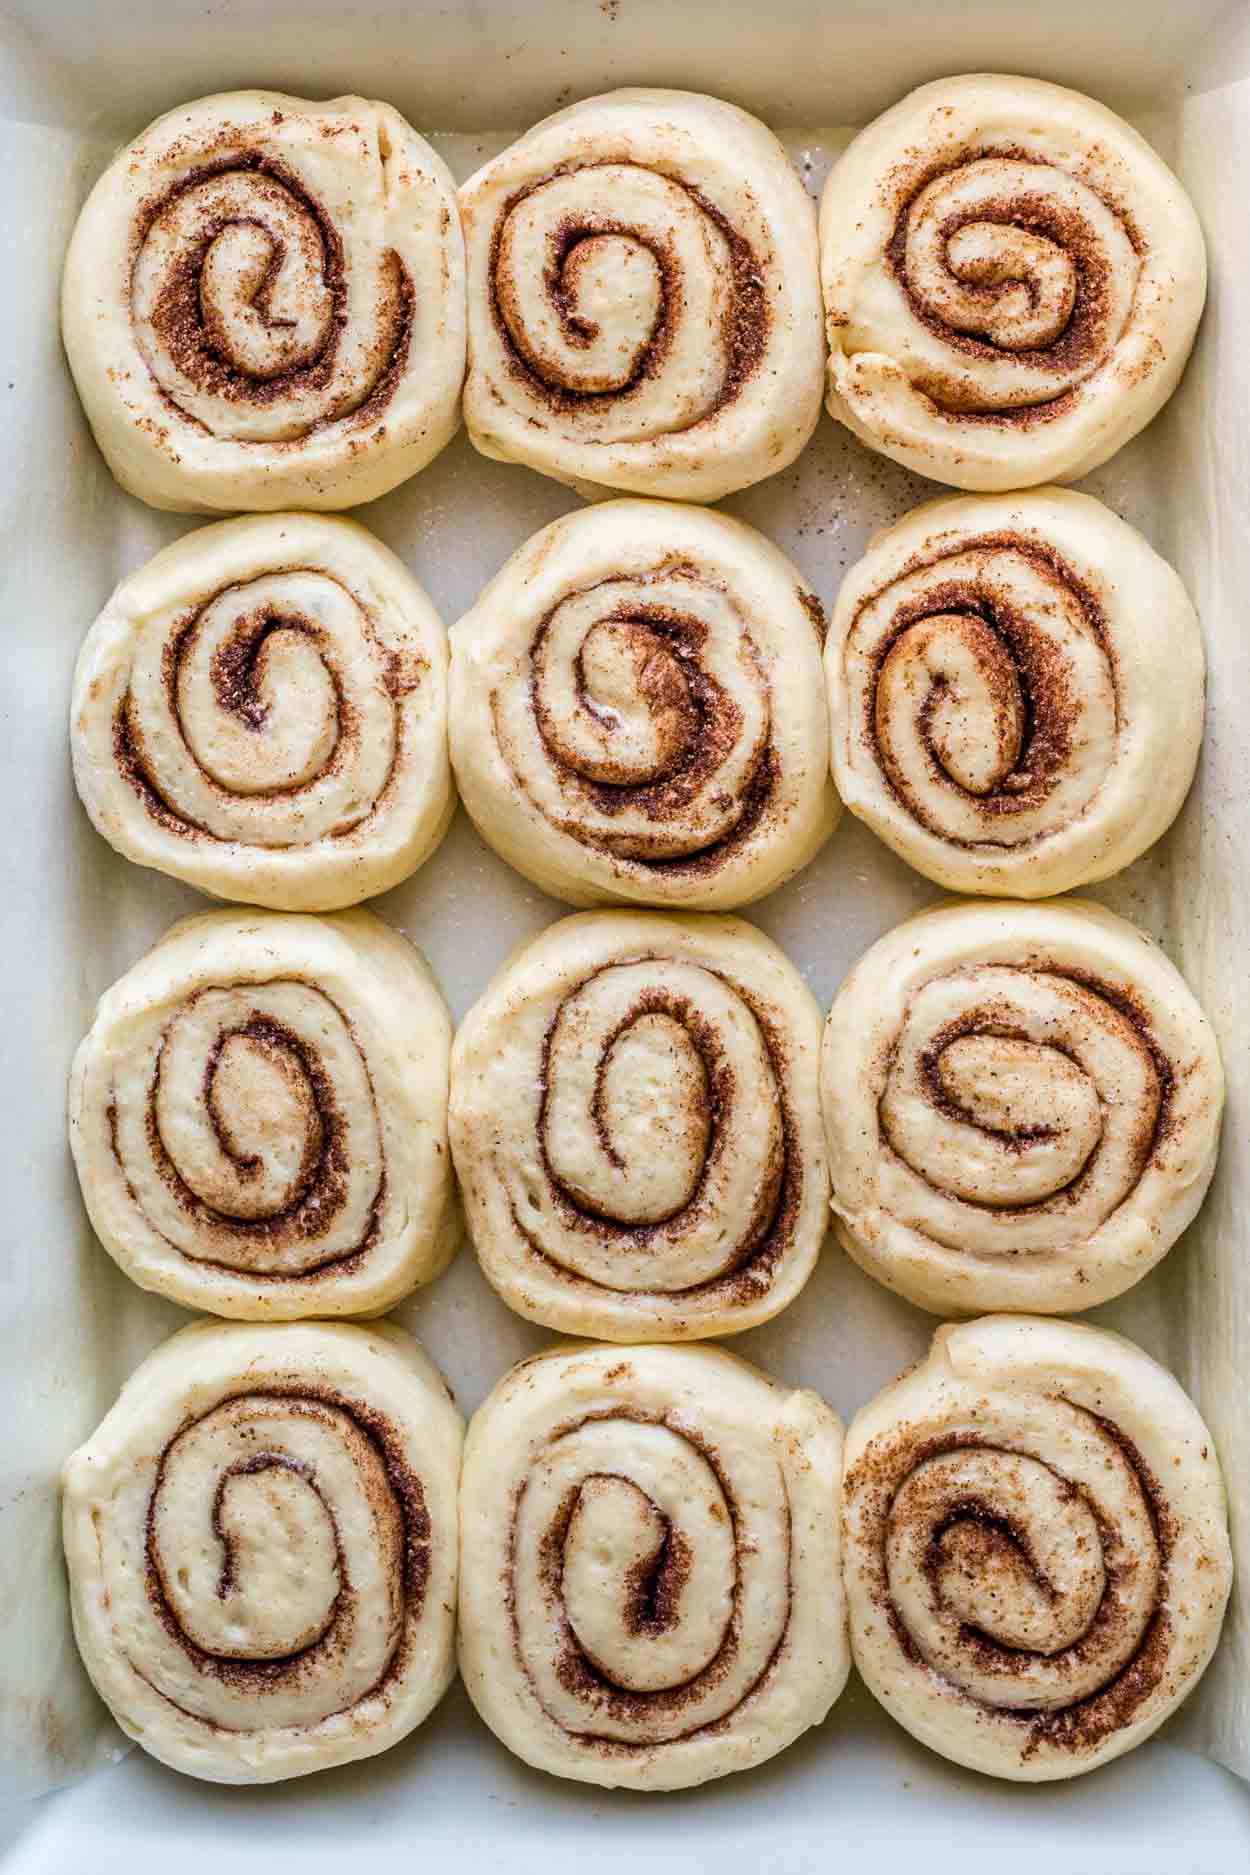 Cinnamon buns arranged in a baking dish to rise.